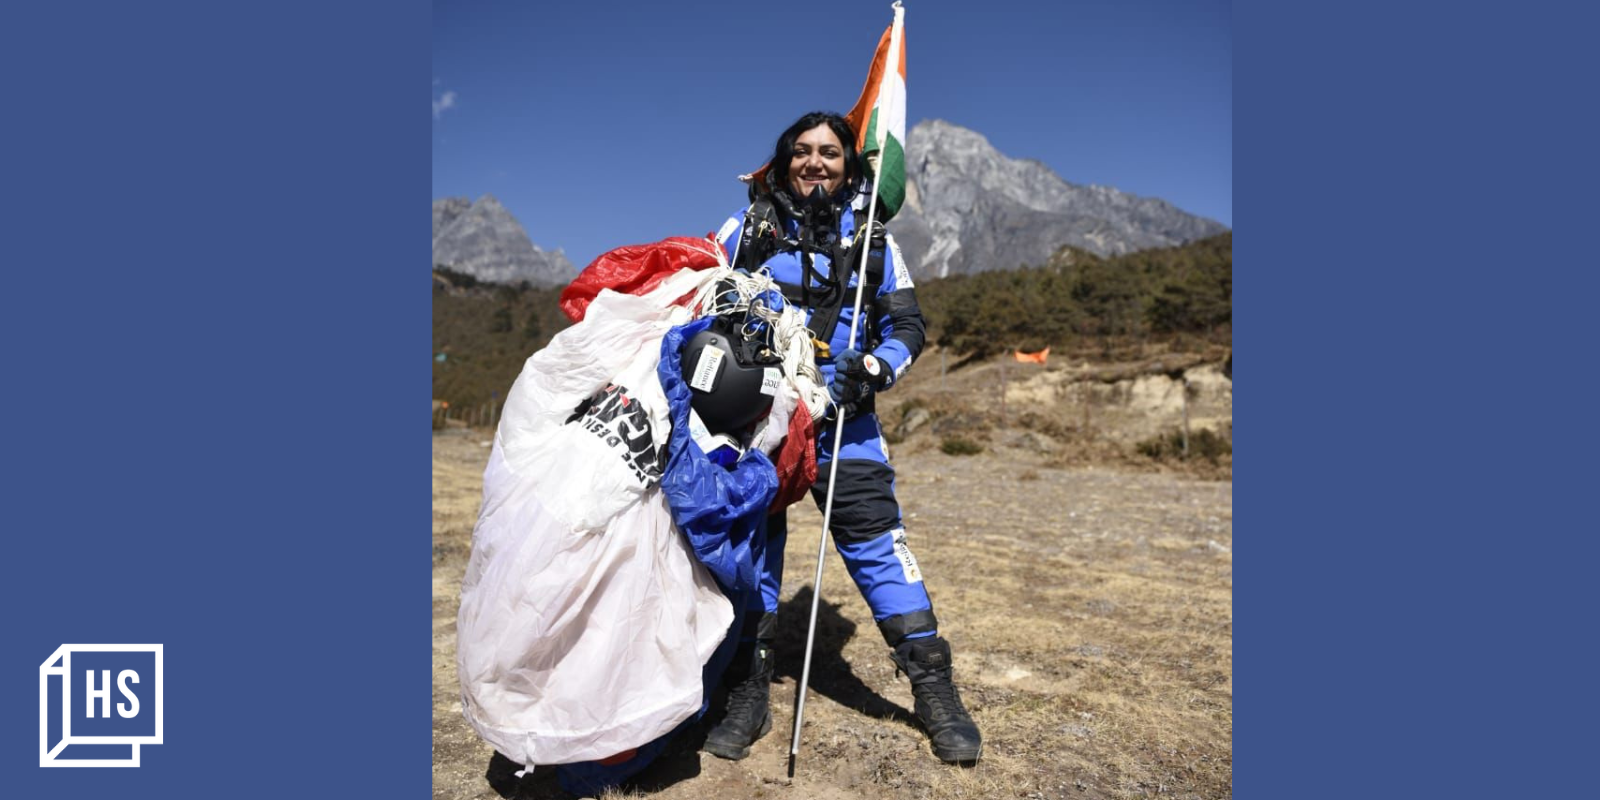 Meet Shital Mahajan, the first woman to skydive over North Pole, South Pole, and Mount Everest